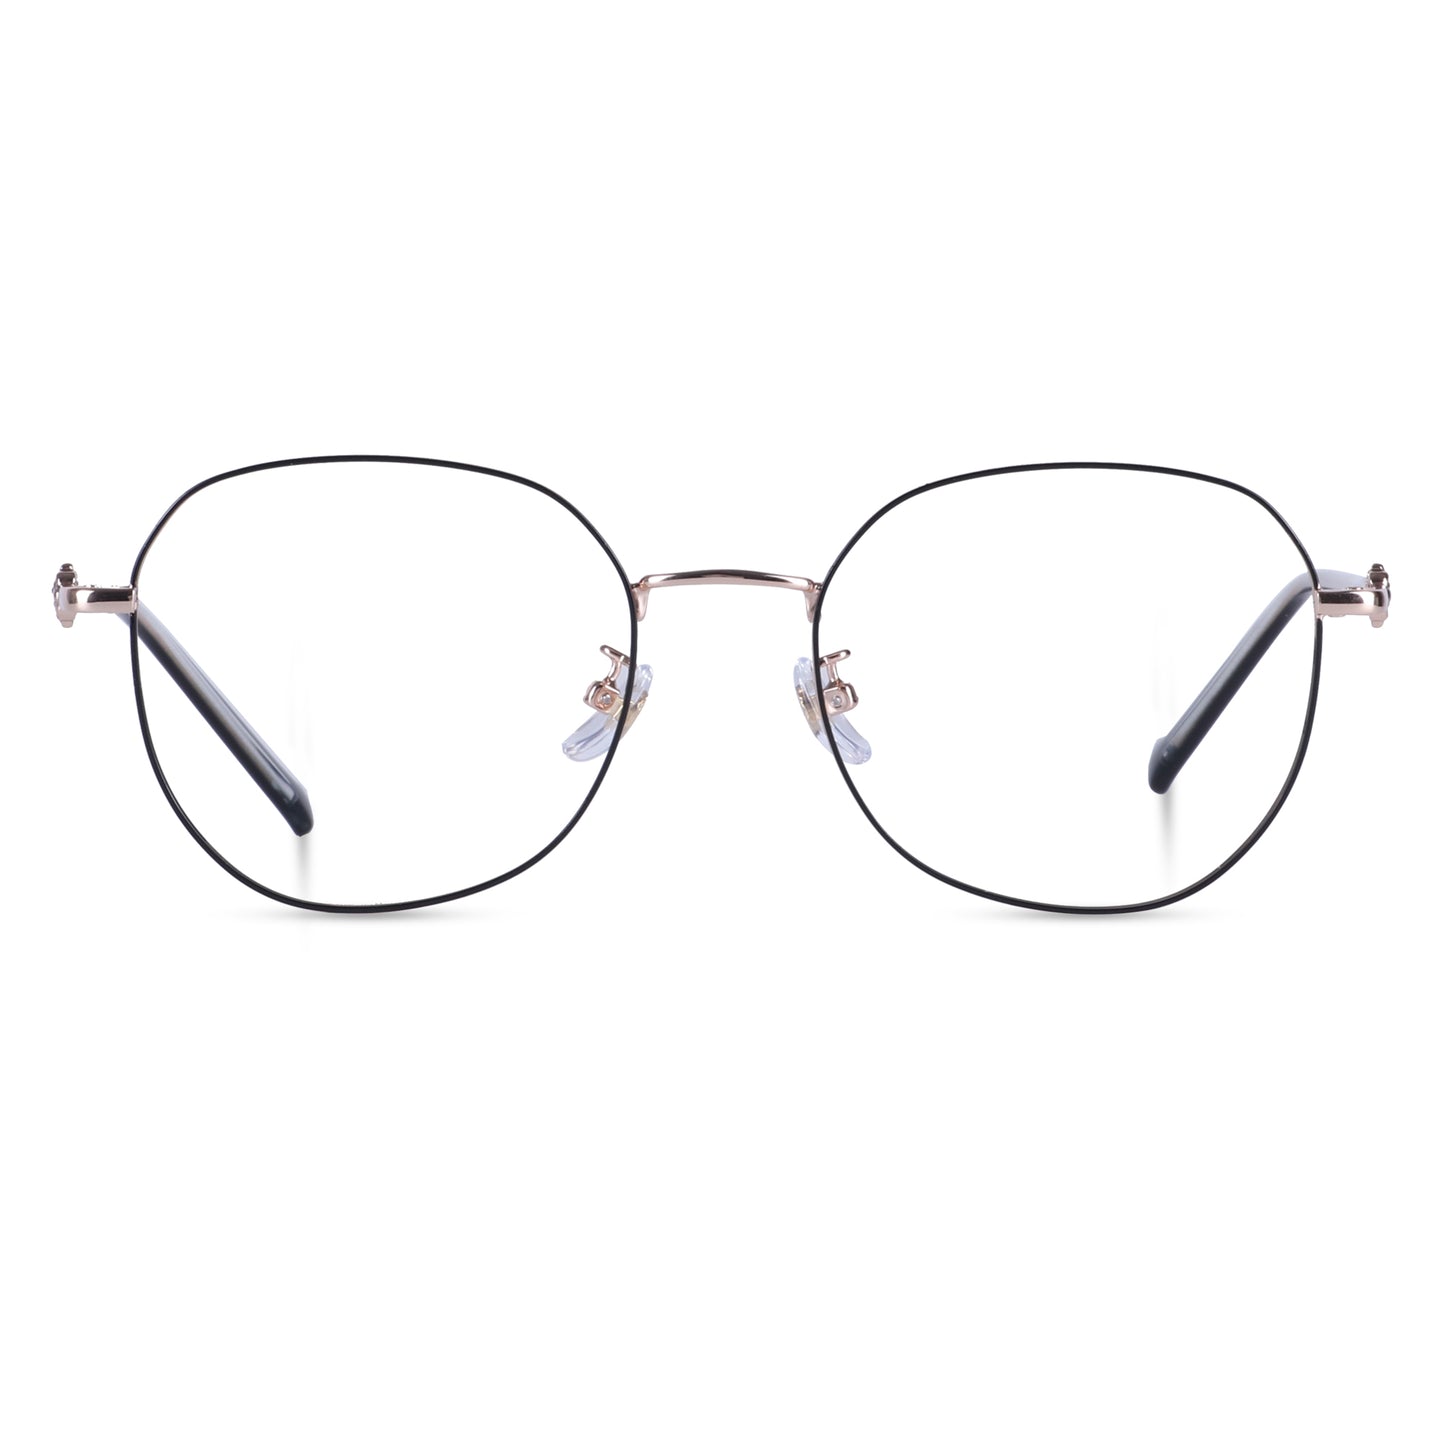 Sirts Black Silver Round S11609 (Including Anti-Glare Lens)